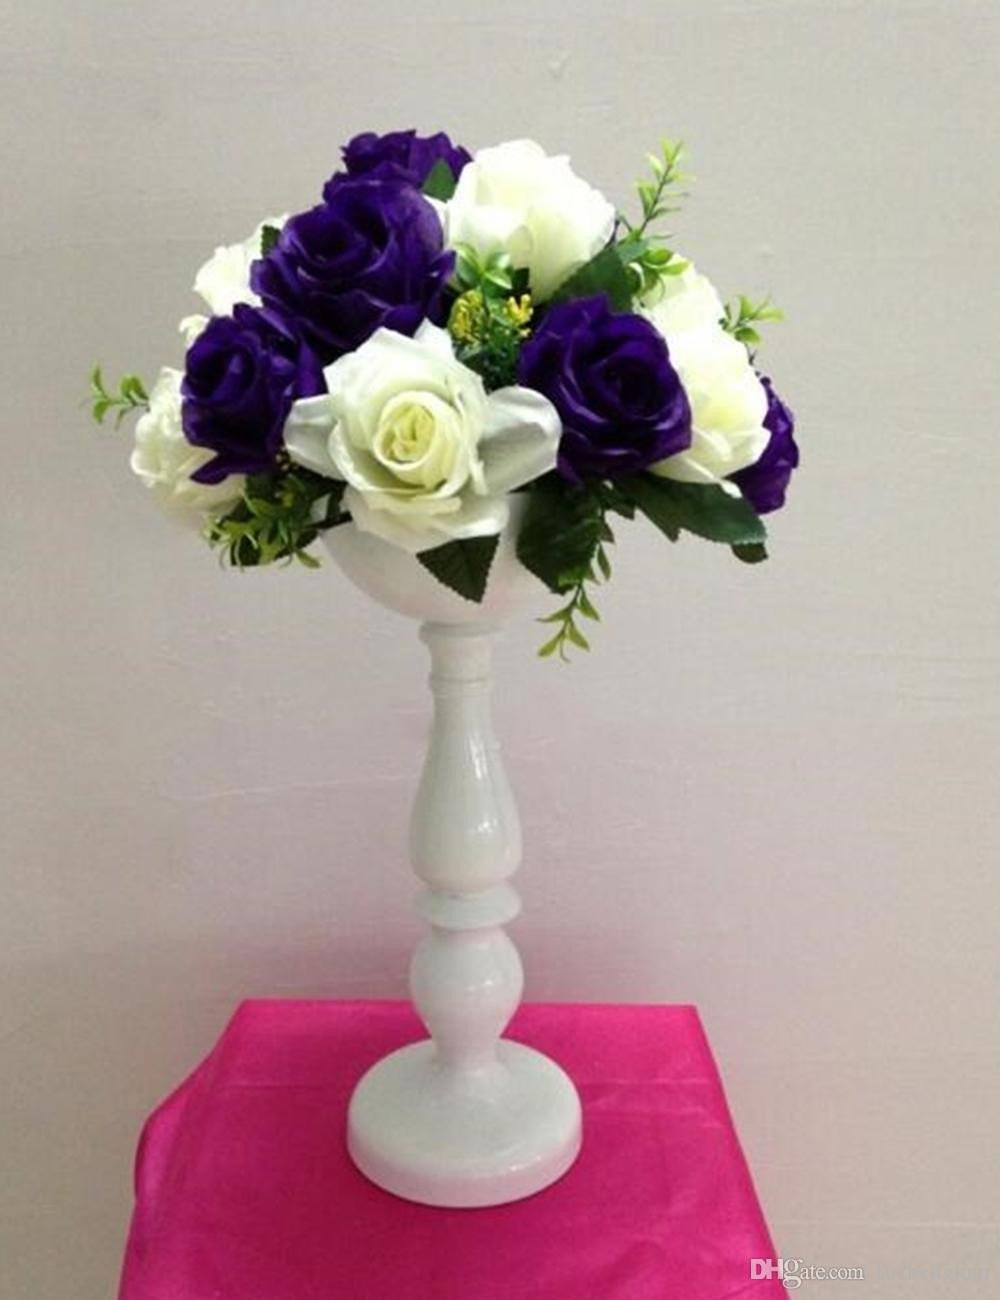 white plastic vases wholesale of new arrive 37 cm tall white metal flower vase wedding table inside new arrive 37 cm tall white metal flower vase wedding table centerpiece event home decor hotel road lead flower vase road lead online with 237 99 piece